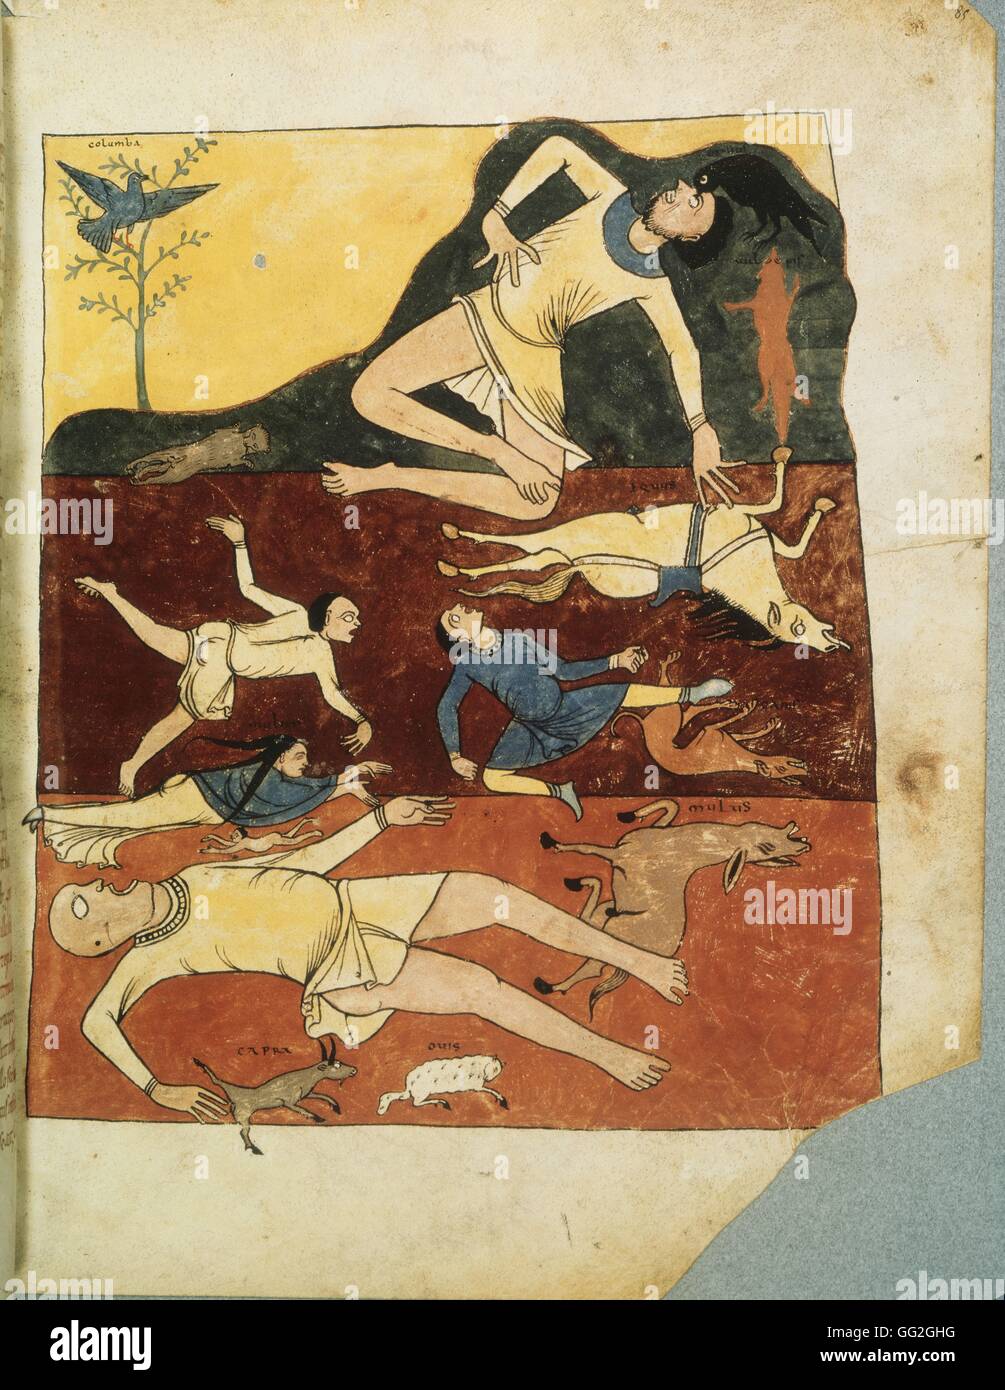 Beatus de Liebana   Commentary on the Apocalypse of St. Sever. f° 85:  The Flood: a horse, a dog, a cat, a goat, a mule, a sheep, a fox; The crow gouging out a man's eyes; The dove on an olive branch. Mid 11th century FranceParis, Bibliothèque Nationale Stock Photo